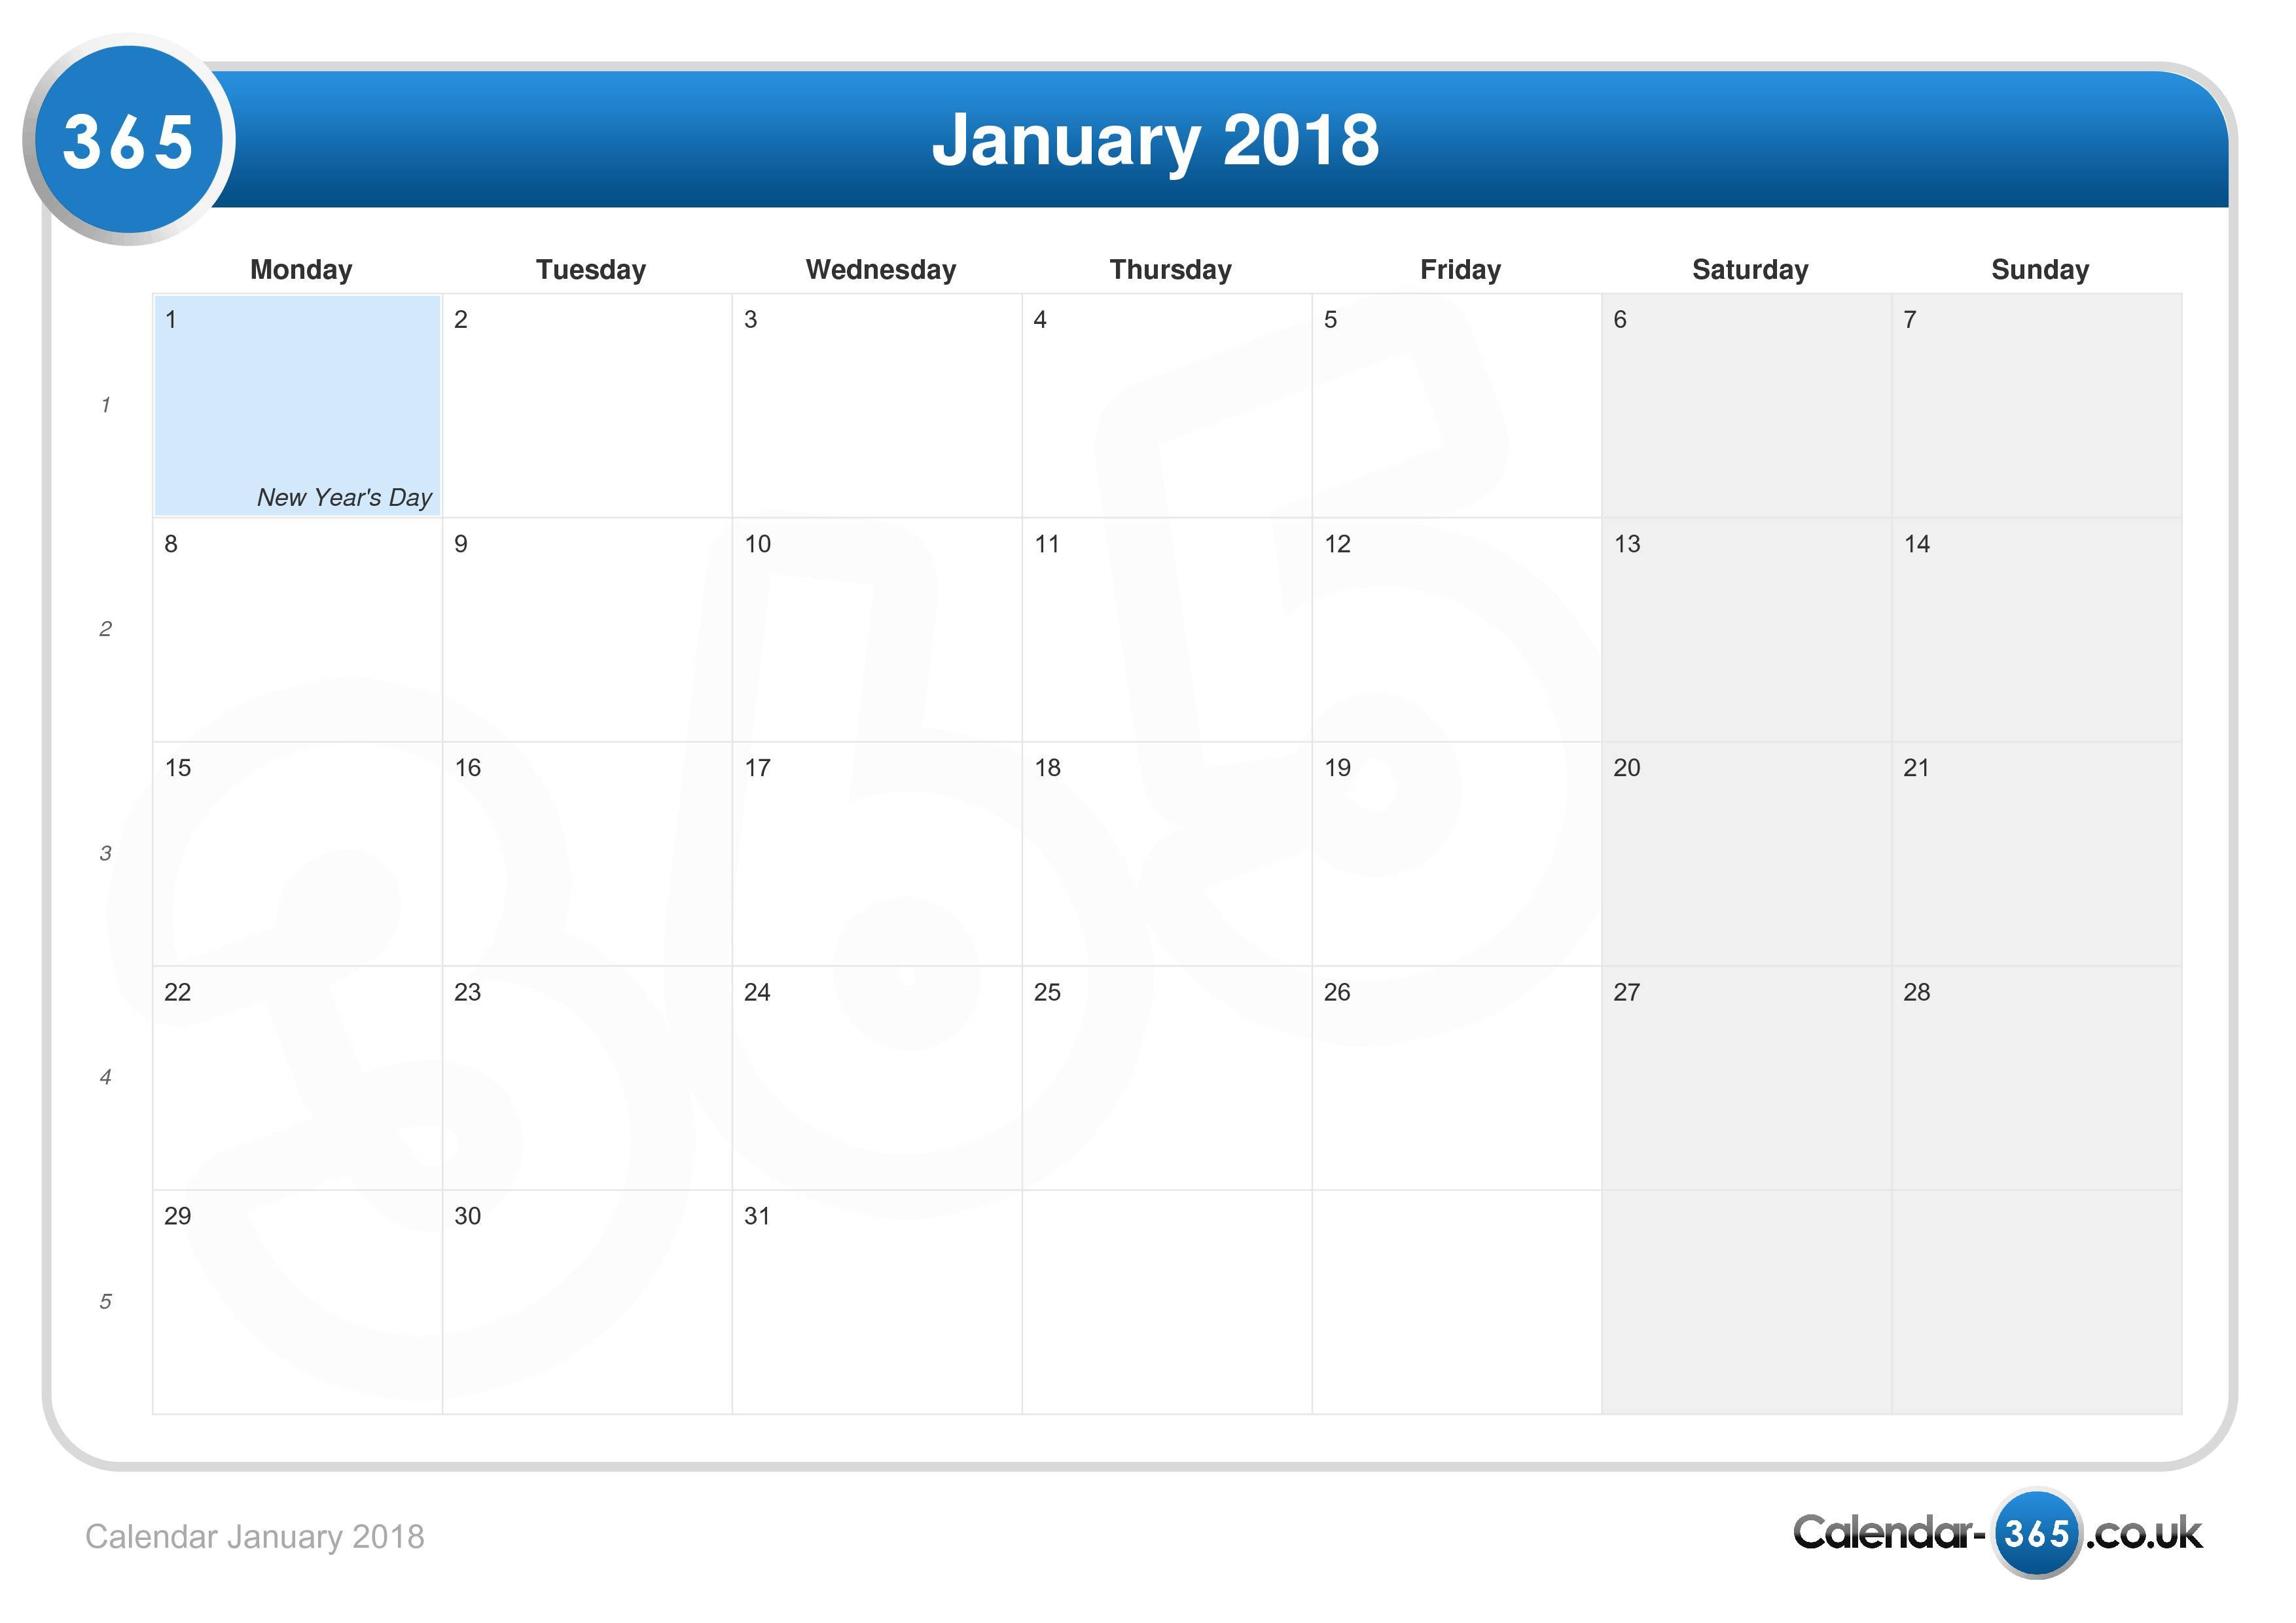 free-calendar-printable-great-for-kids-january-2018-do-your-kids